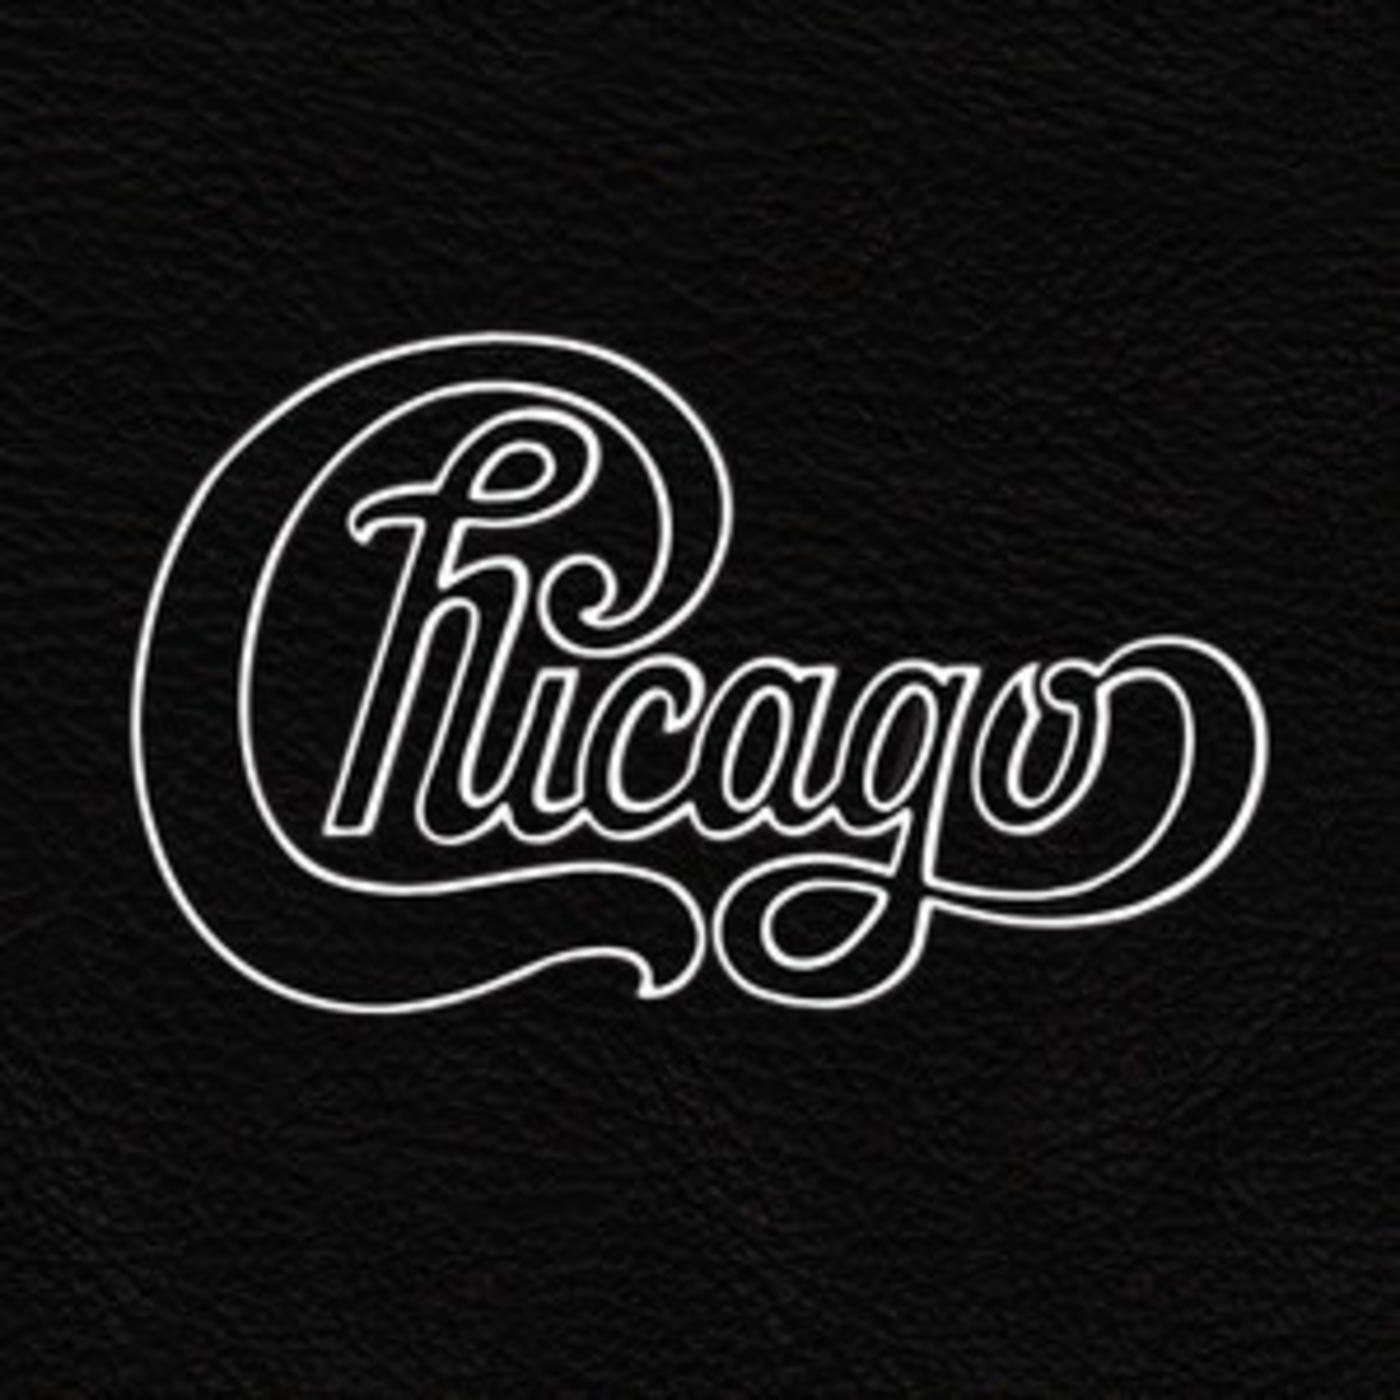 Official Chicago Playlist - If You Leave Me Now, Hard To Say I'm Sorry, 25 or 6 to 4, Look Away